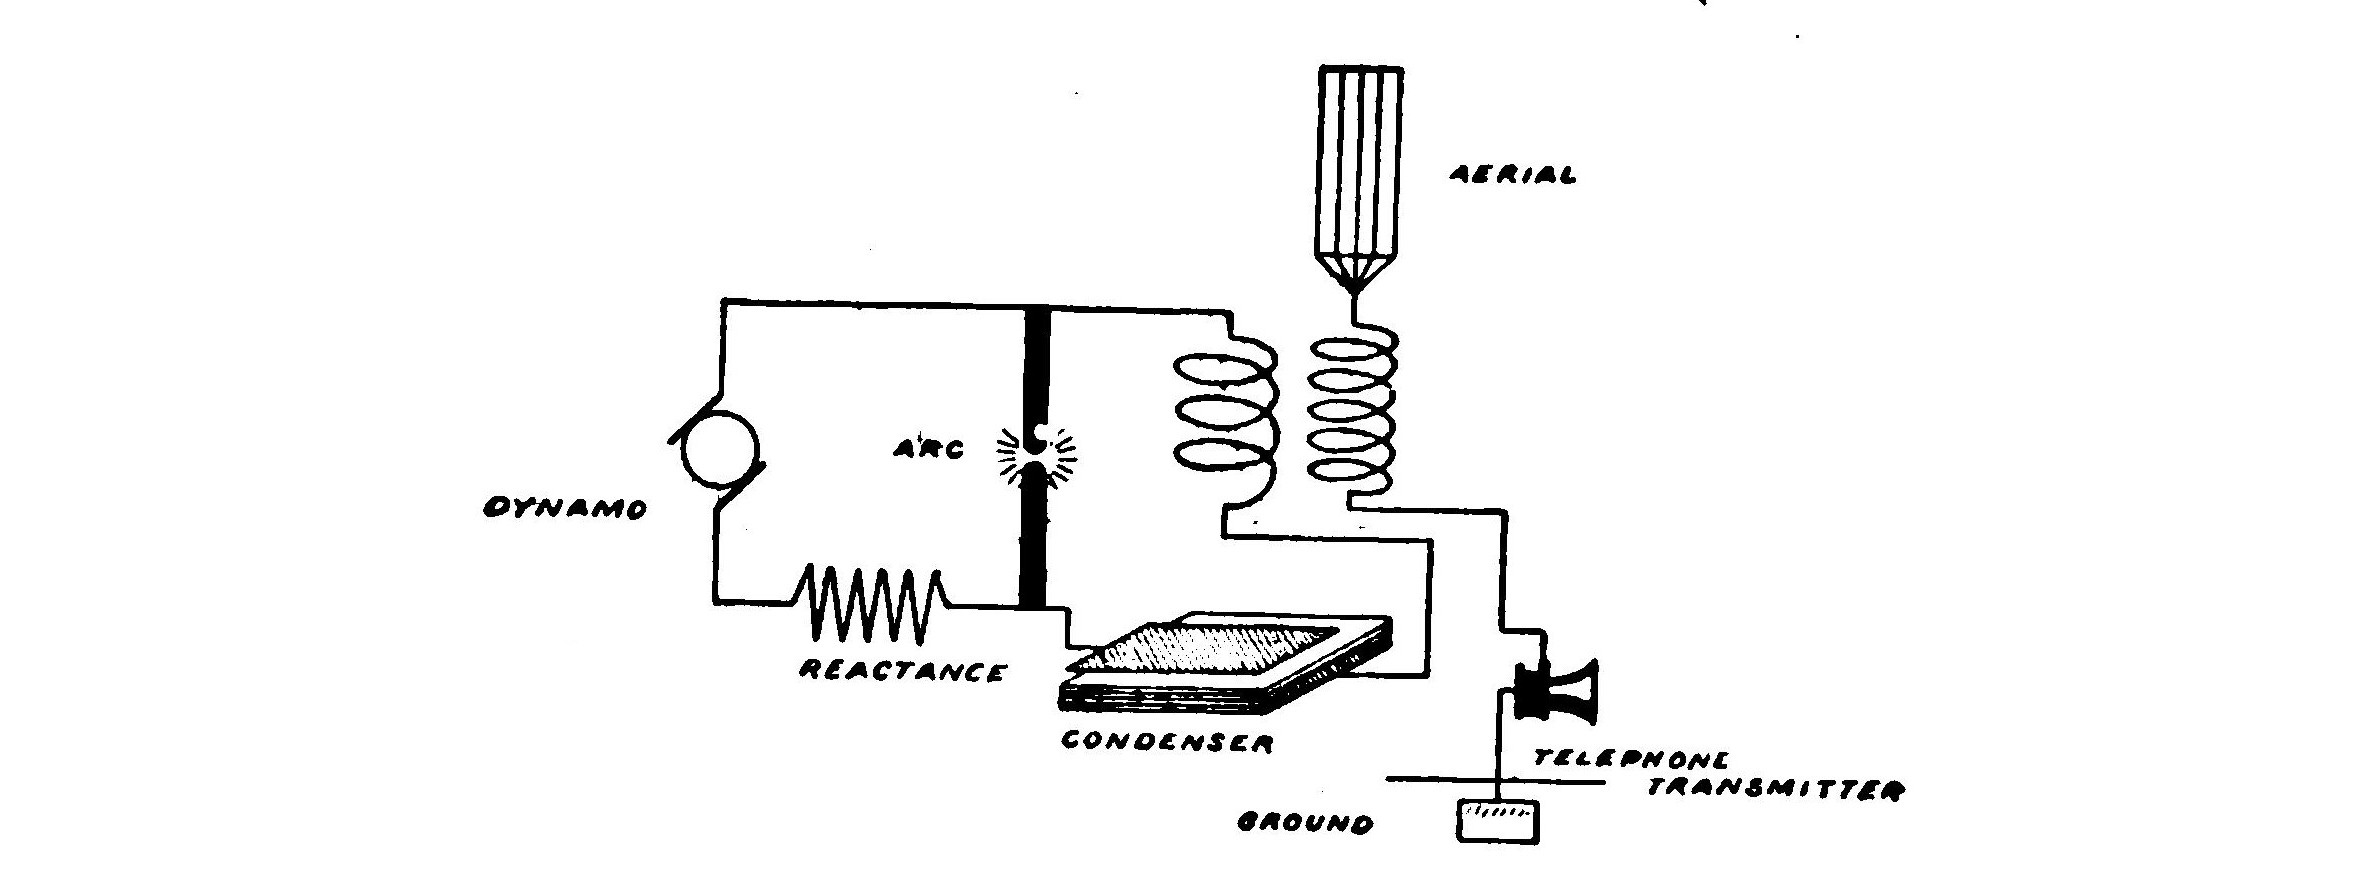 FIG. 146.—Diagram showing how a wireless telephone transmitting system is arranged.